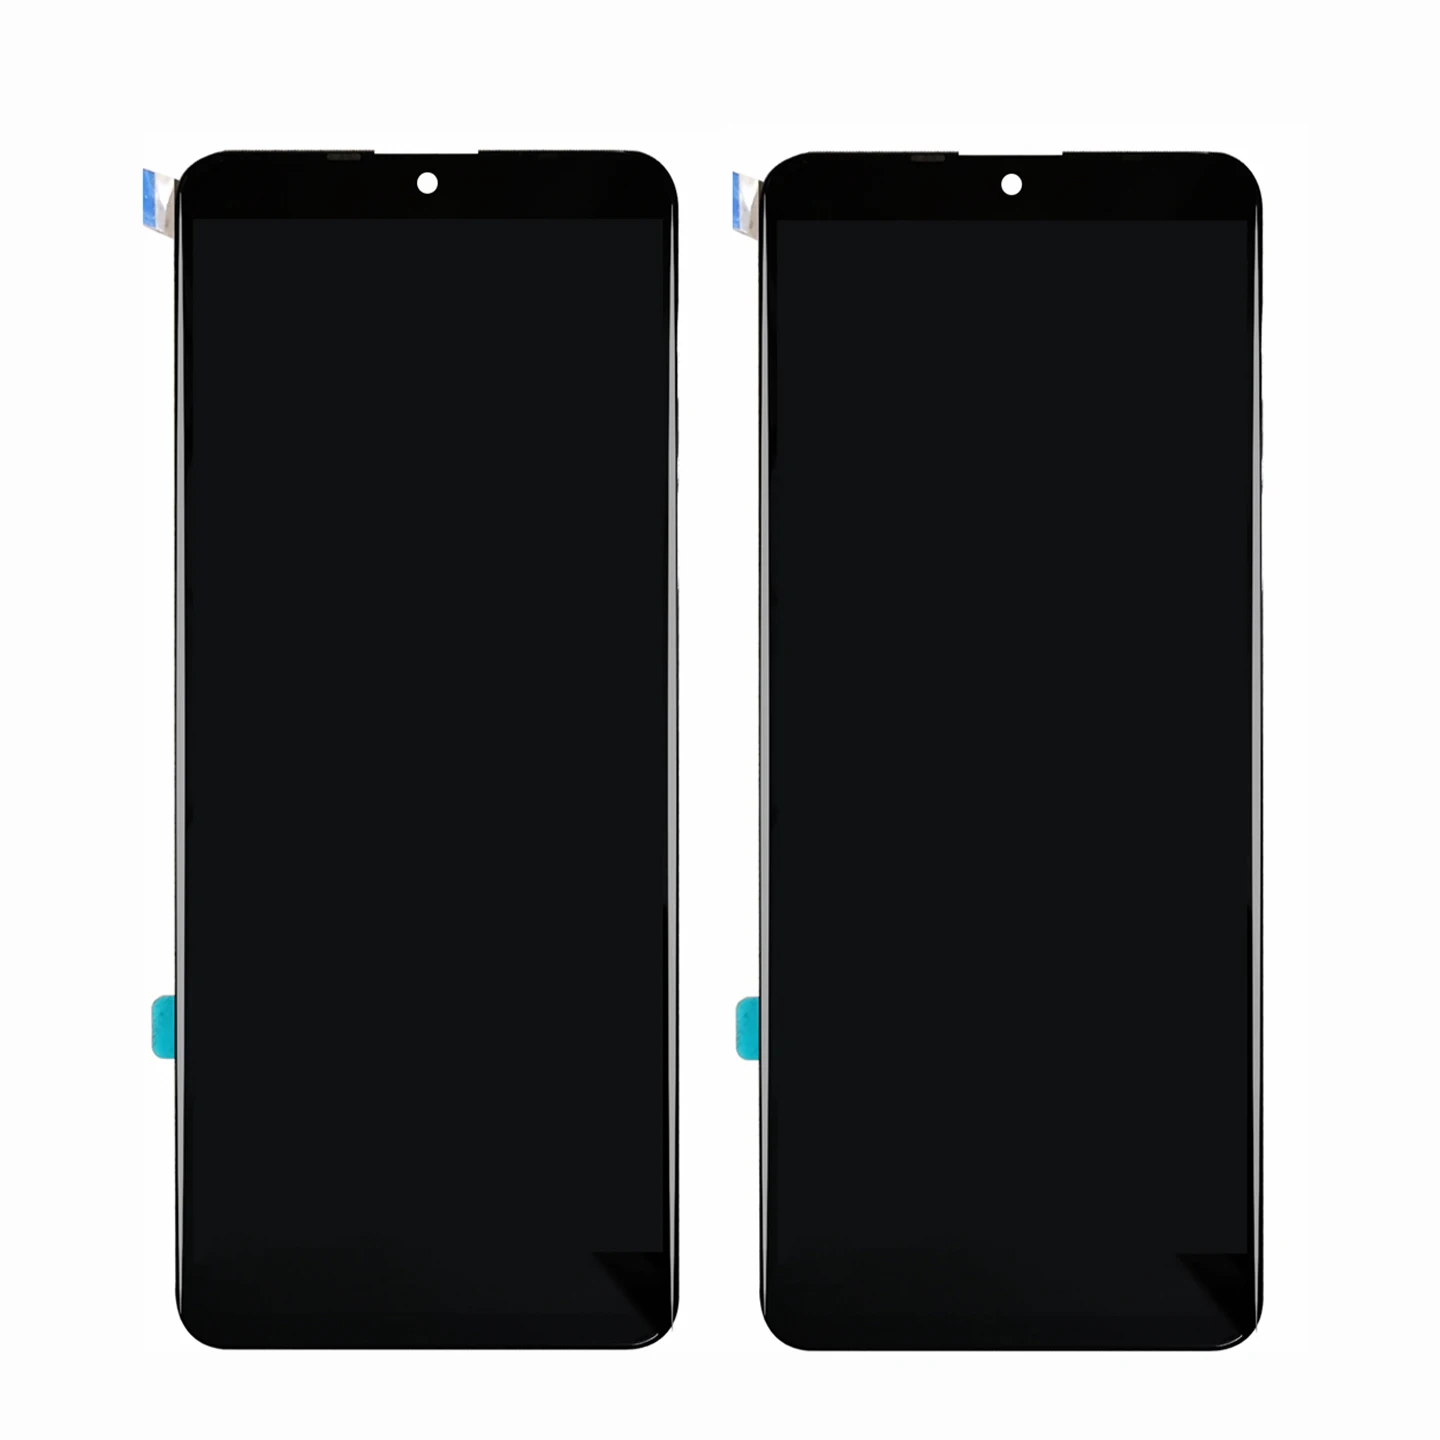 New LCD For HISENSE INFINITY H50S 5G HNR500E LCD Display Touch Screen Digitizer Assembly Perfect Repair